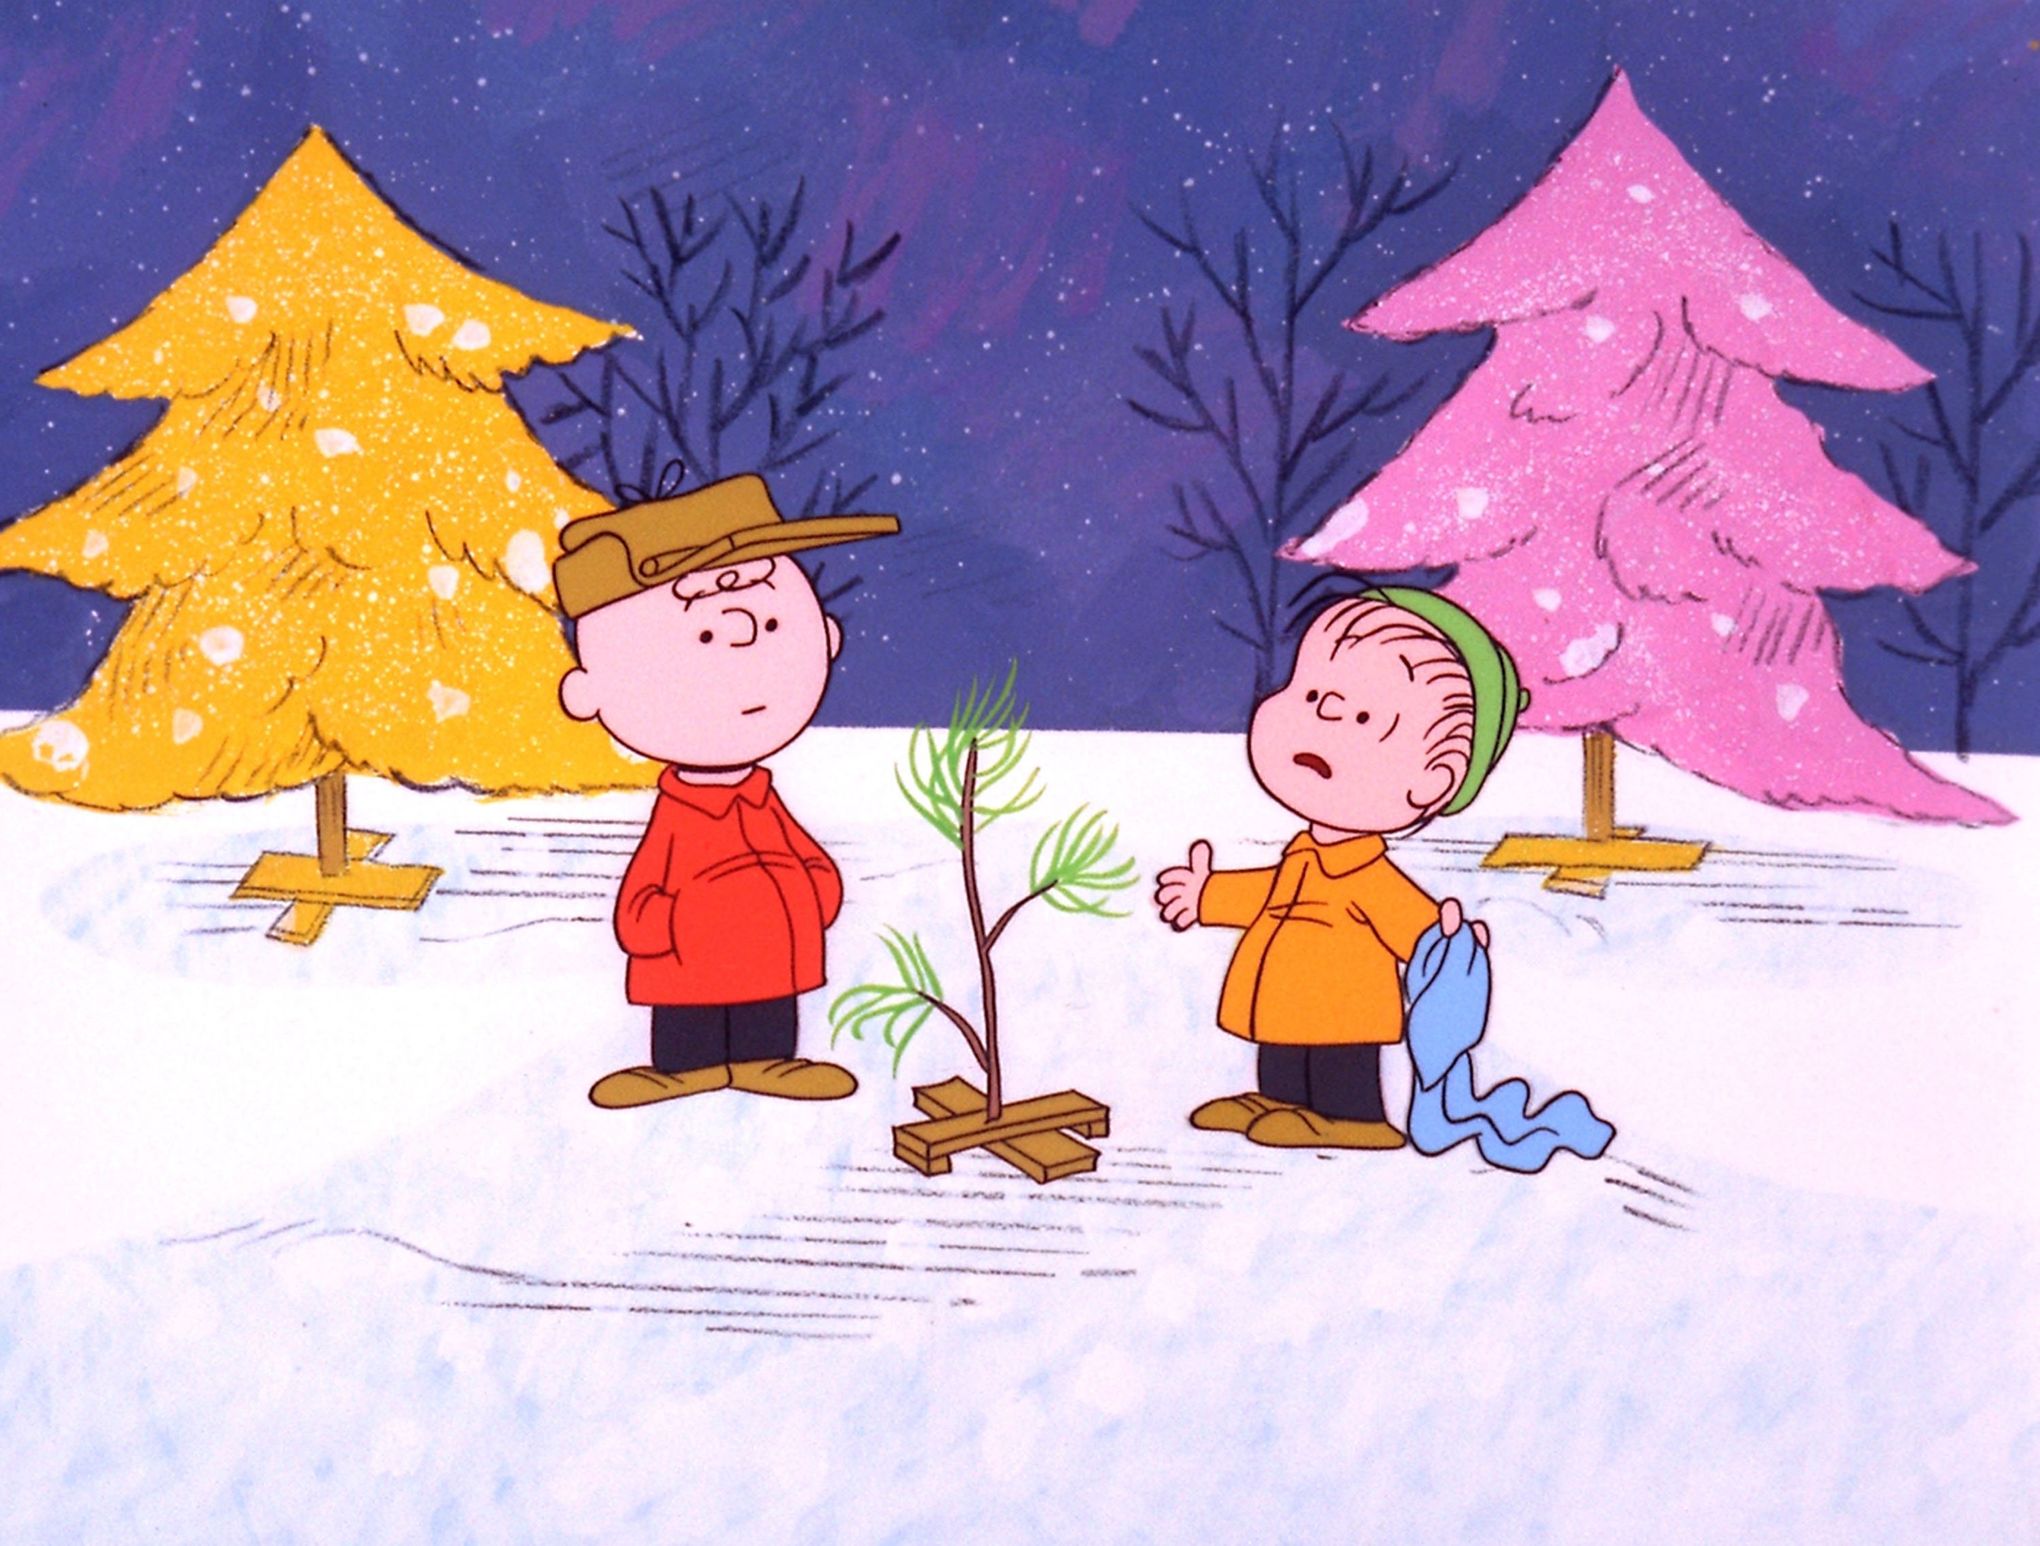 How Charlie Brown became a Christmas tradition